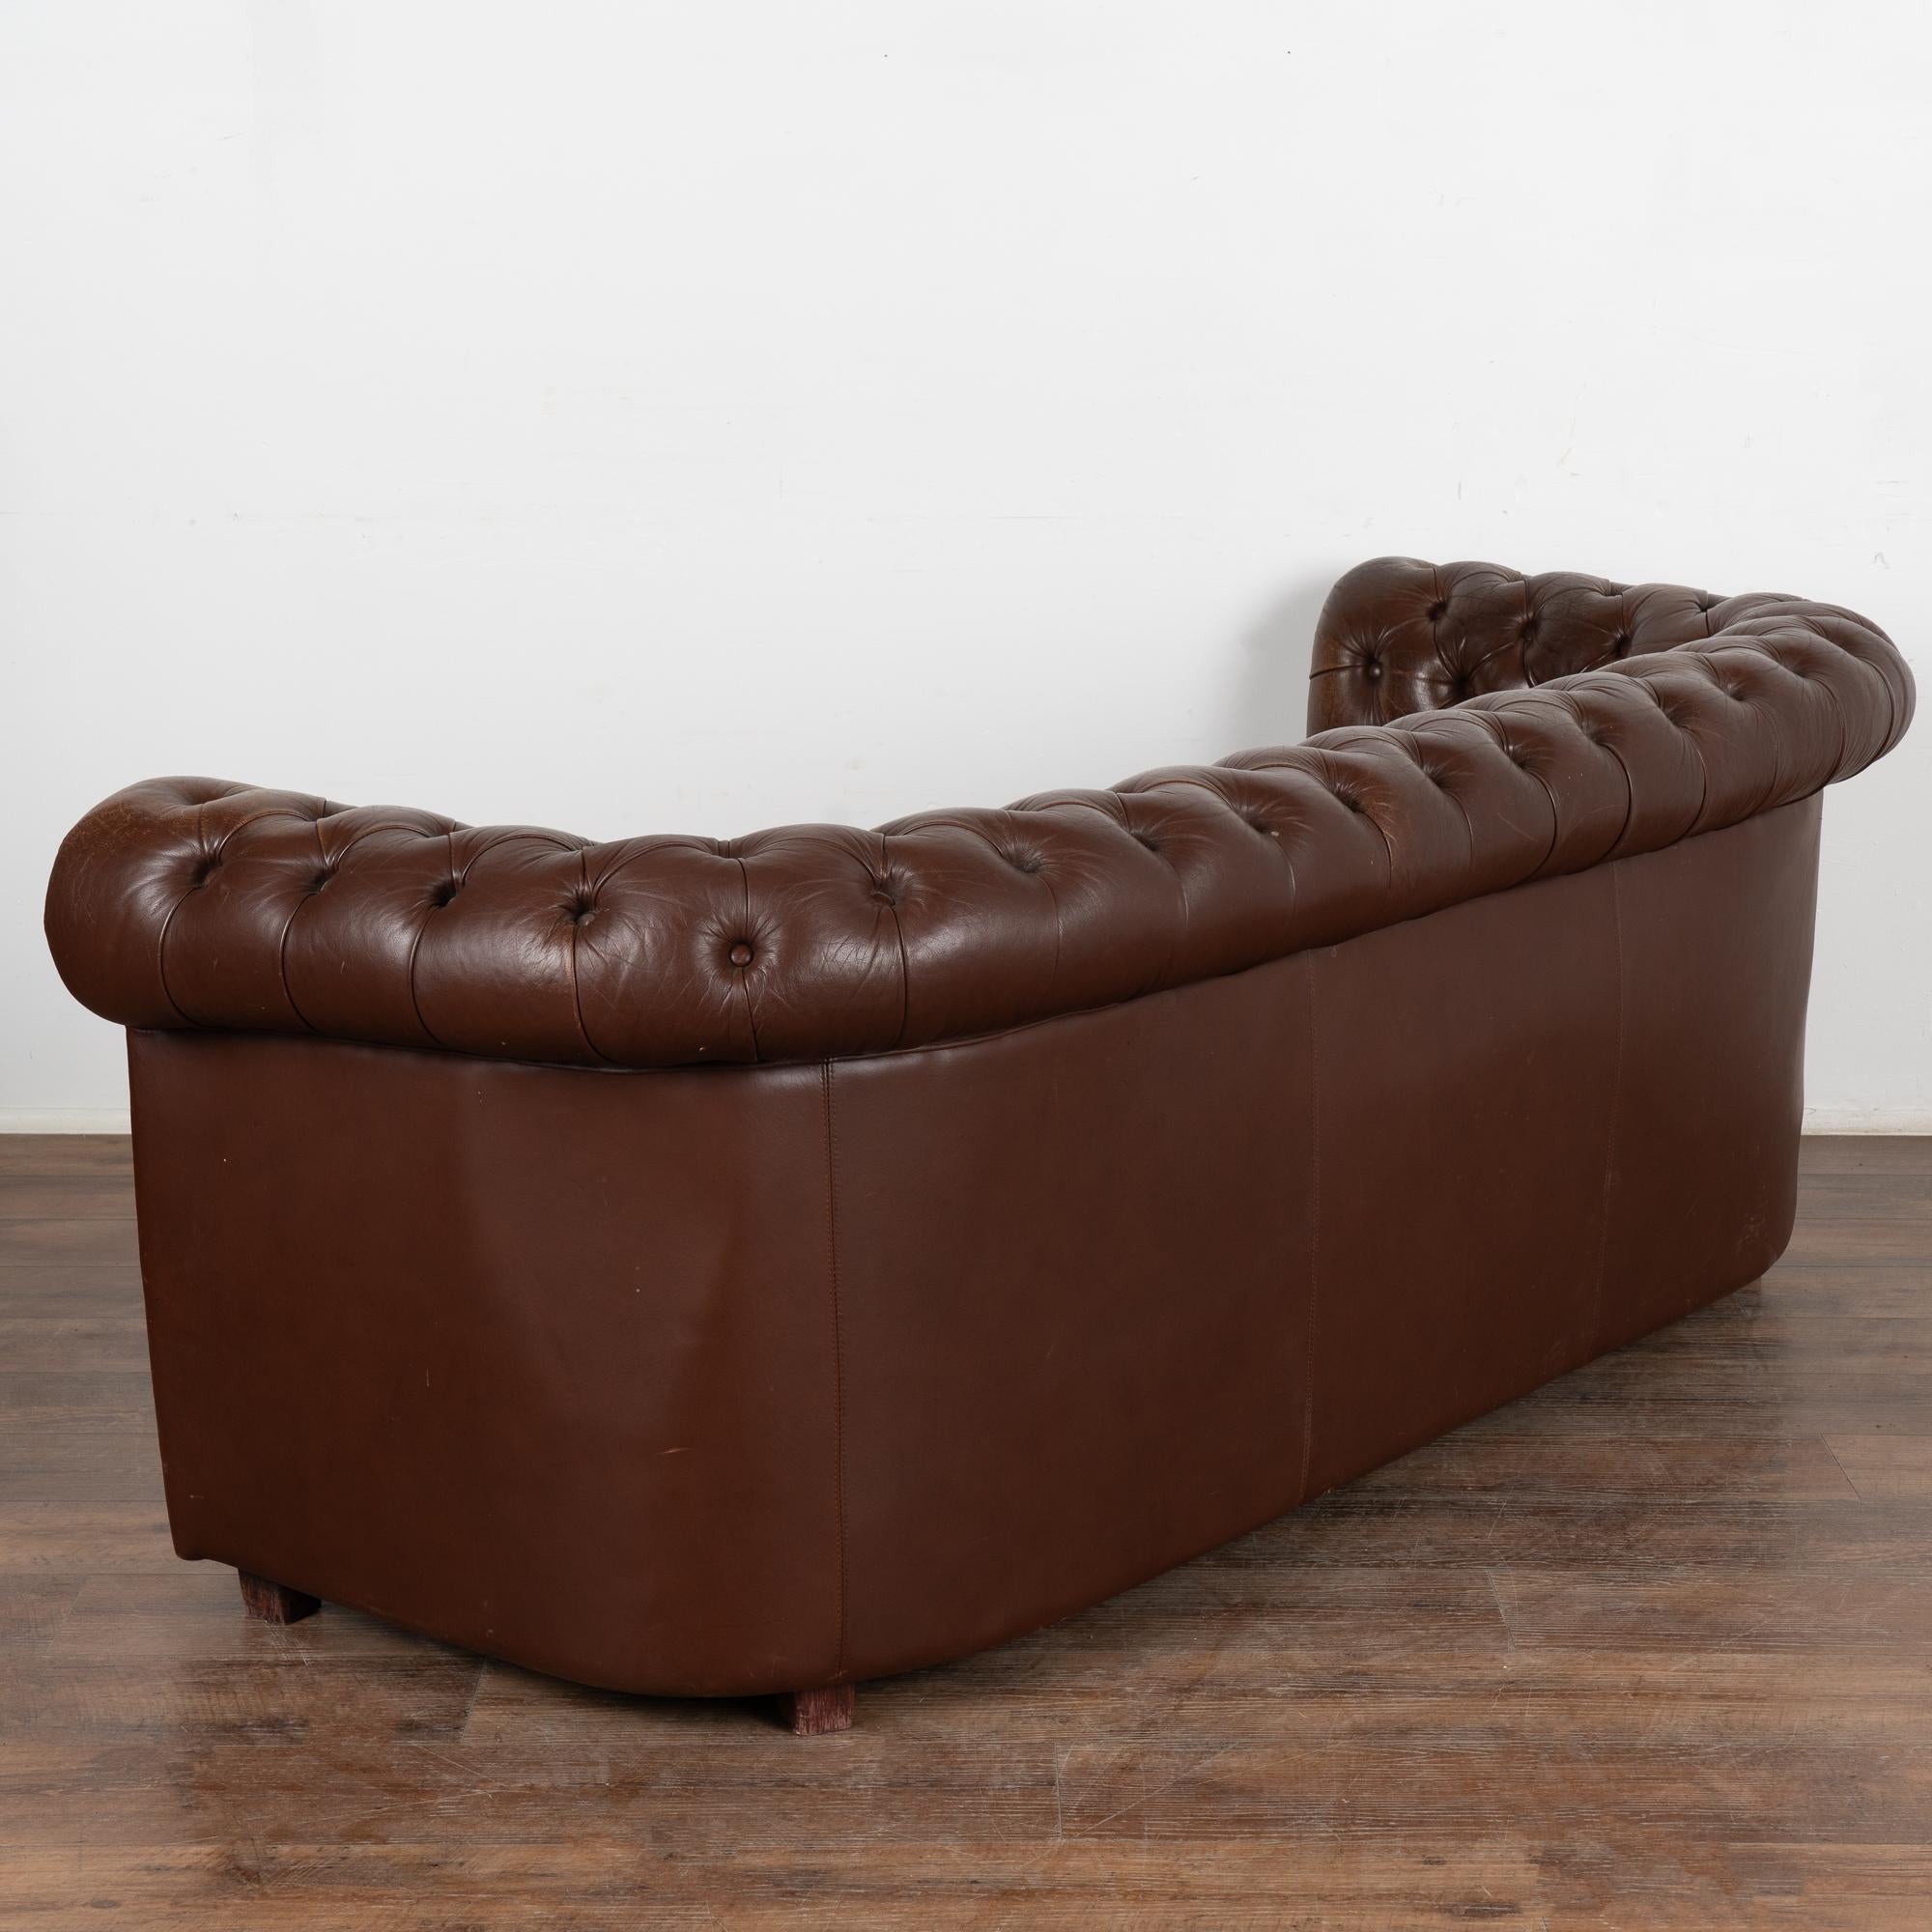 Chesterfield Style Brown Leather 3 Seat Sofa & 2 Club Chairs, circa 1920-40 For Sale 6